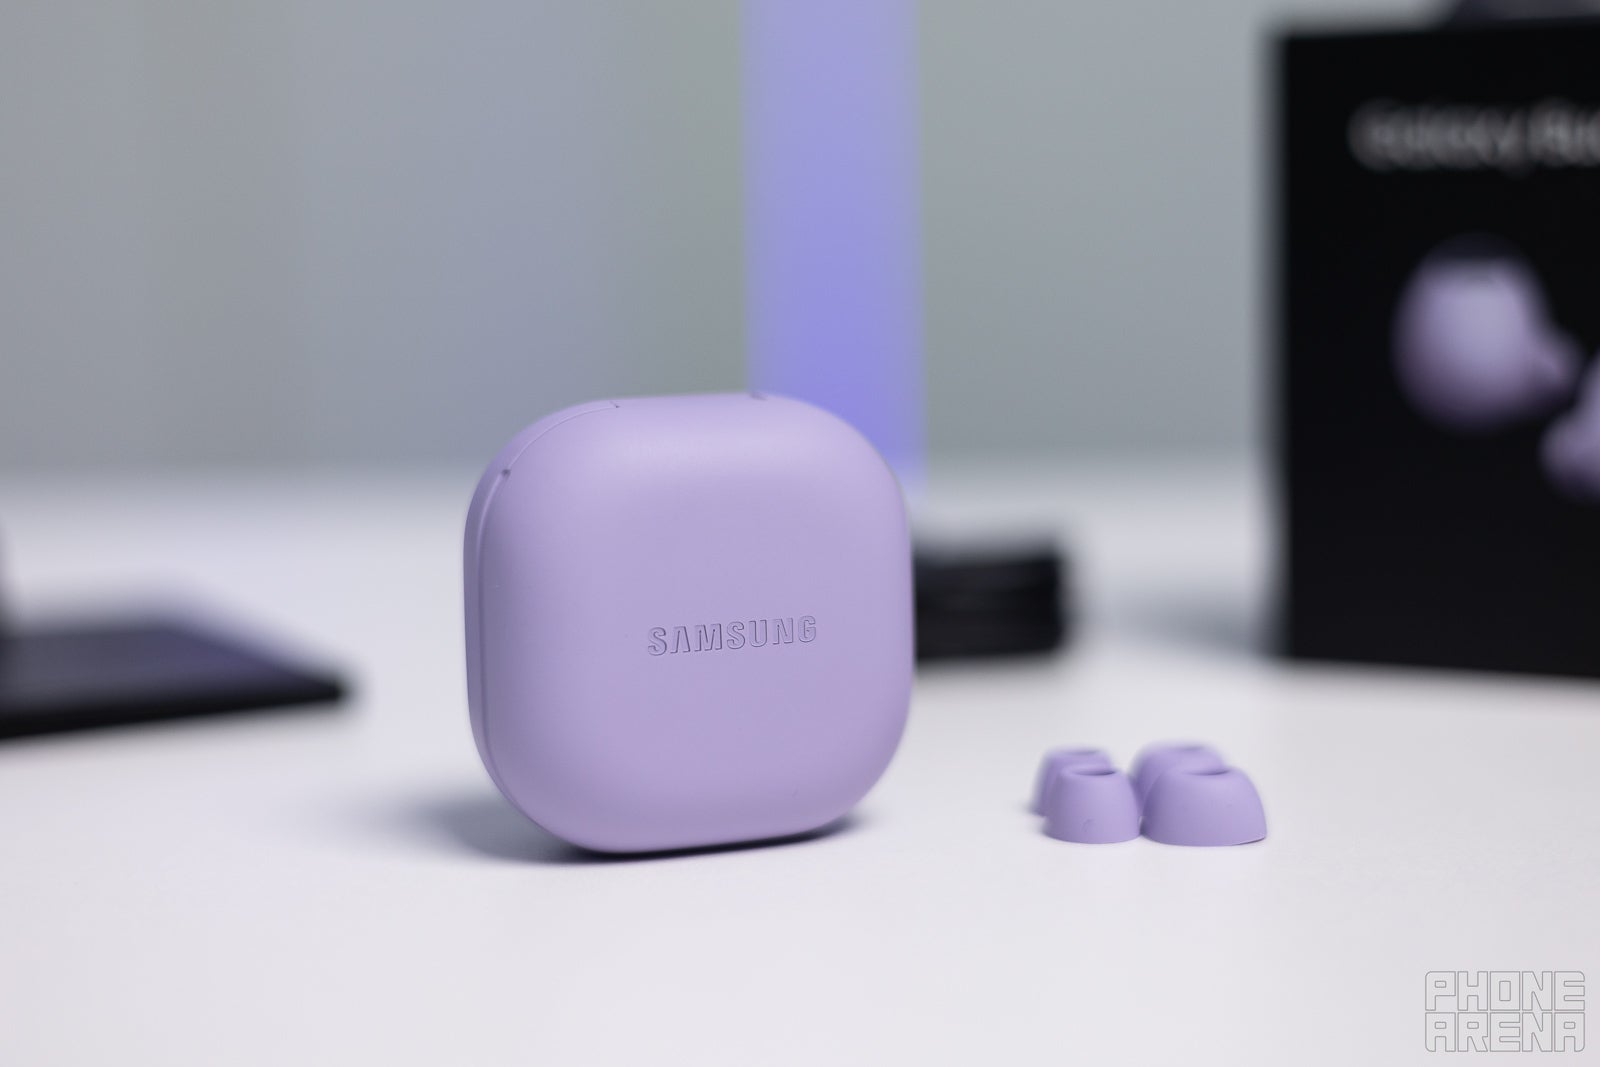 Samsung Galaxy Buds 2 Pro Review: Improved Design Pays Dividends - CNET